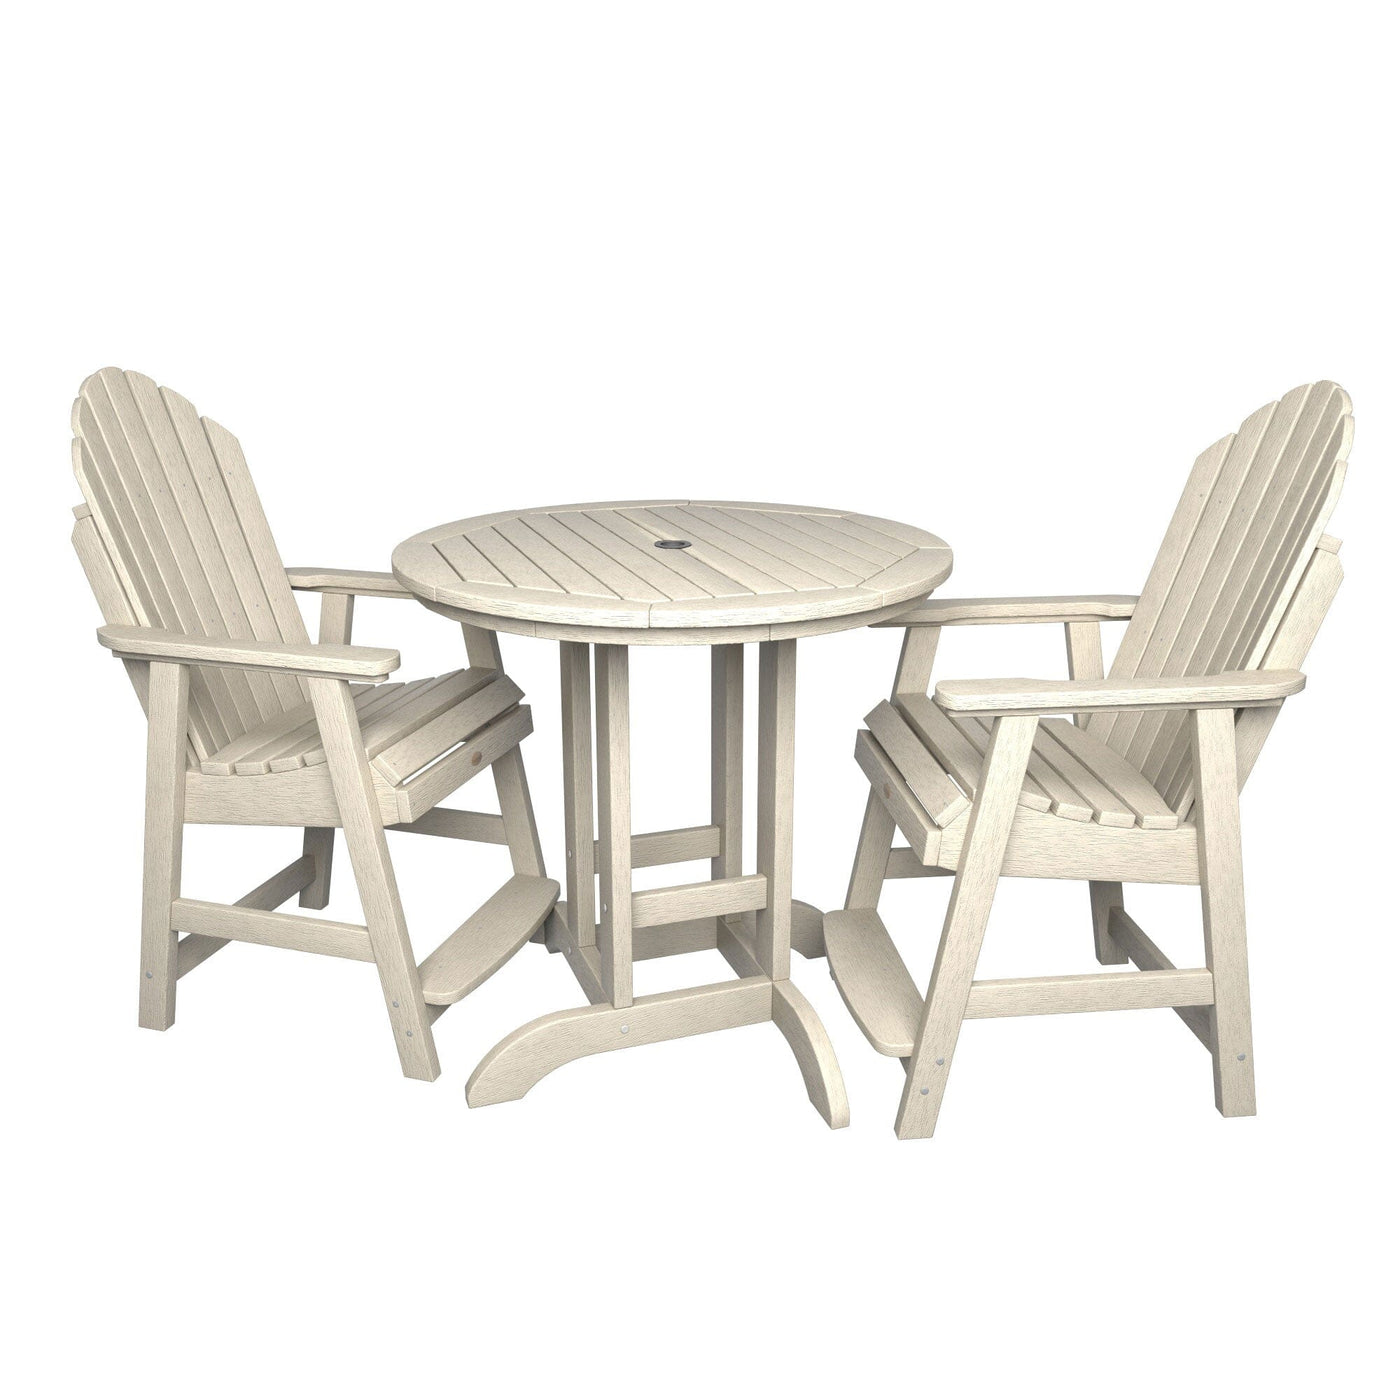 Hamilton 3pc 36in Round Dining Set - Counter Height Dining Highwood USA Whitewash 